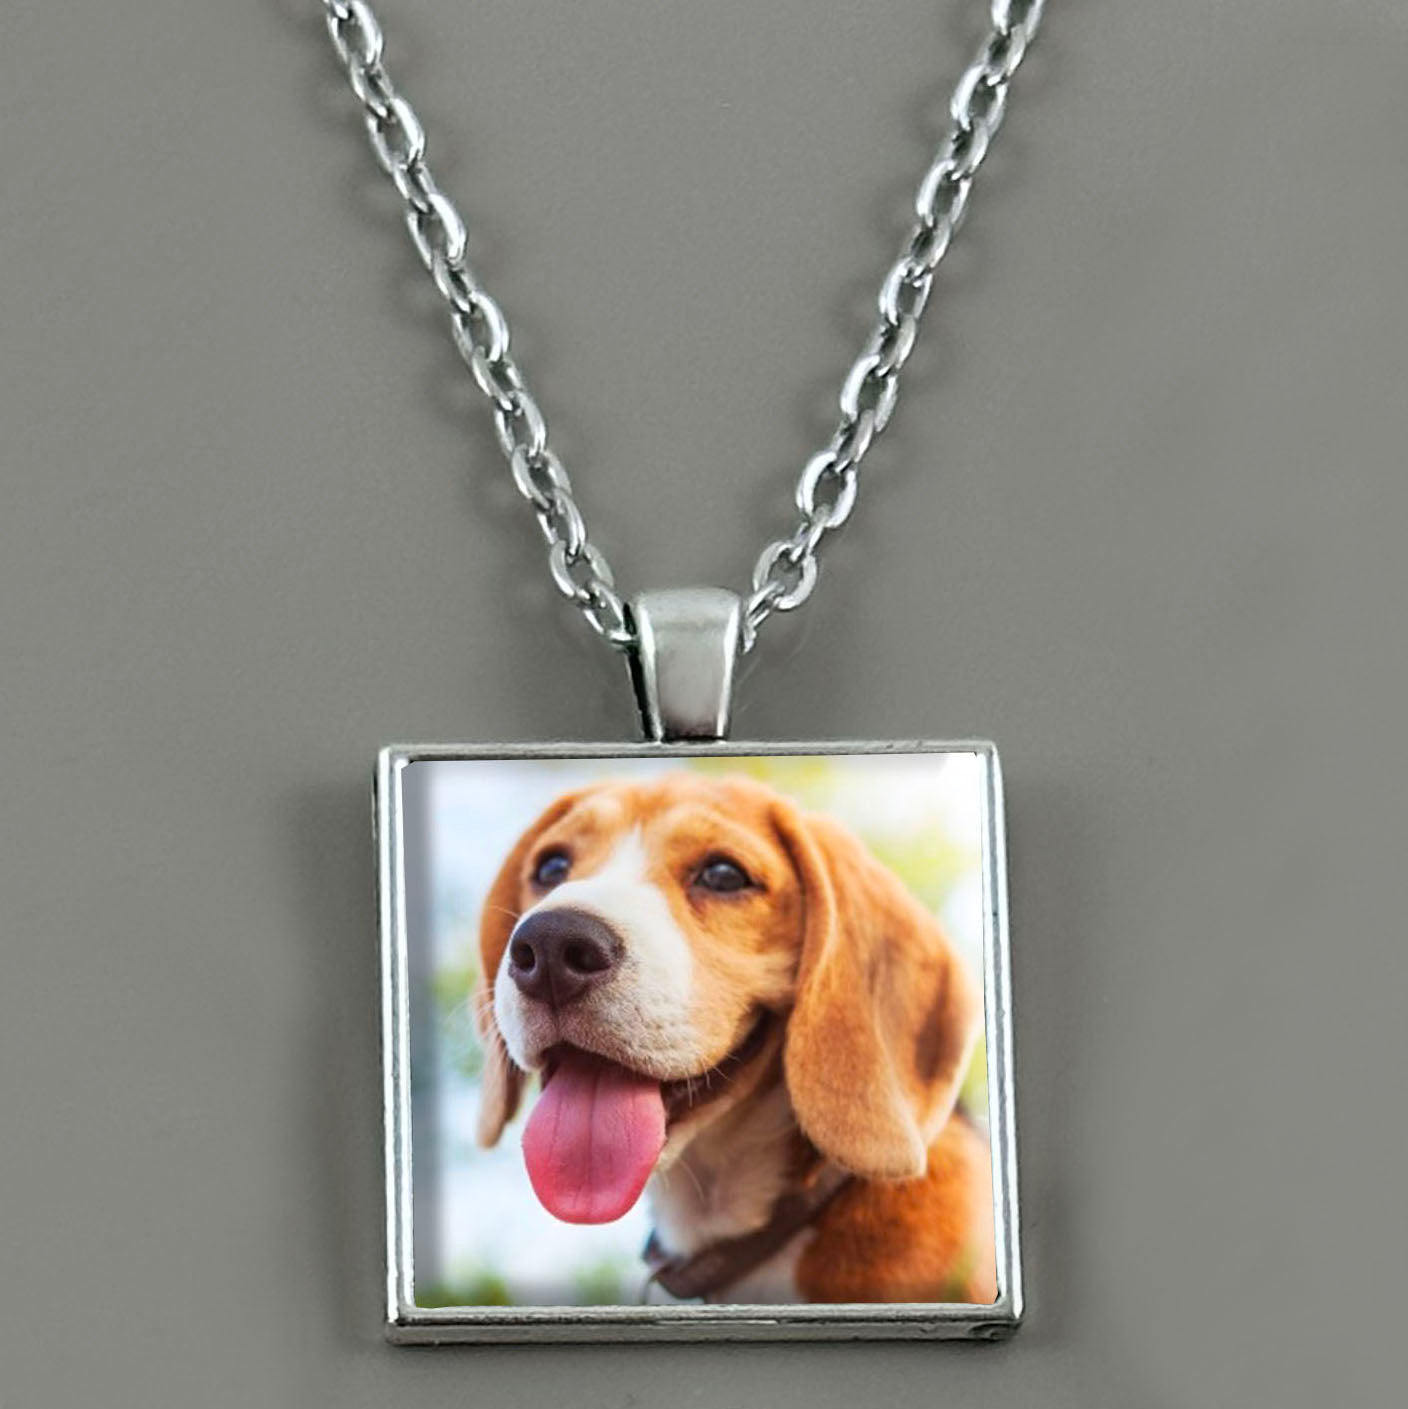 Make Your Own Photo Necklace Kit 25mm Square Antique Silver